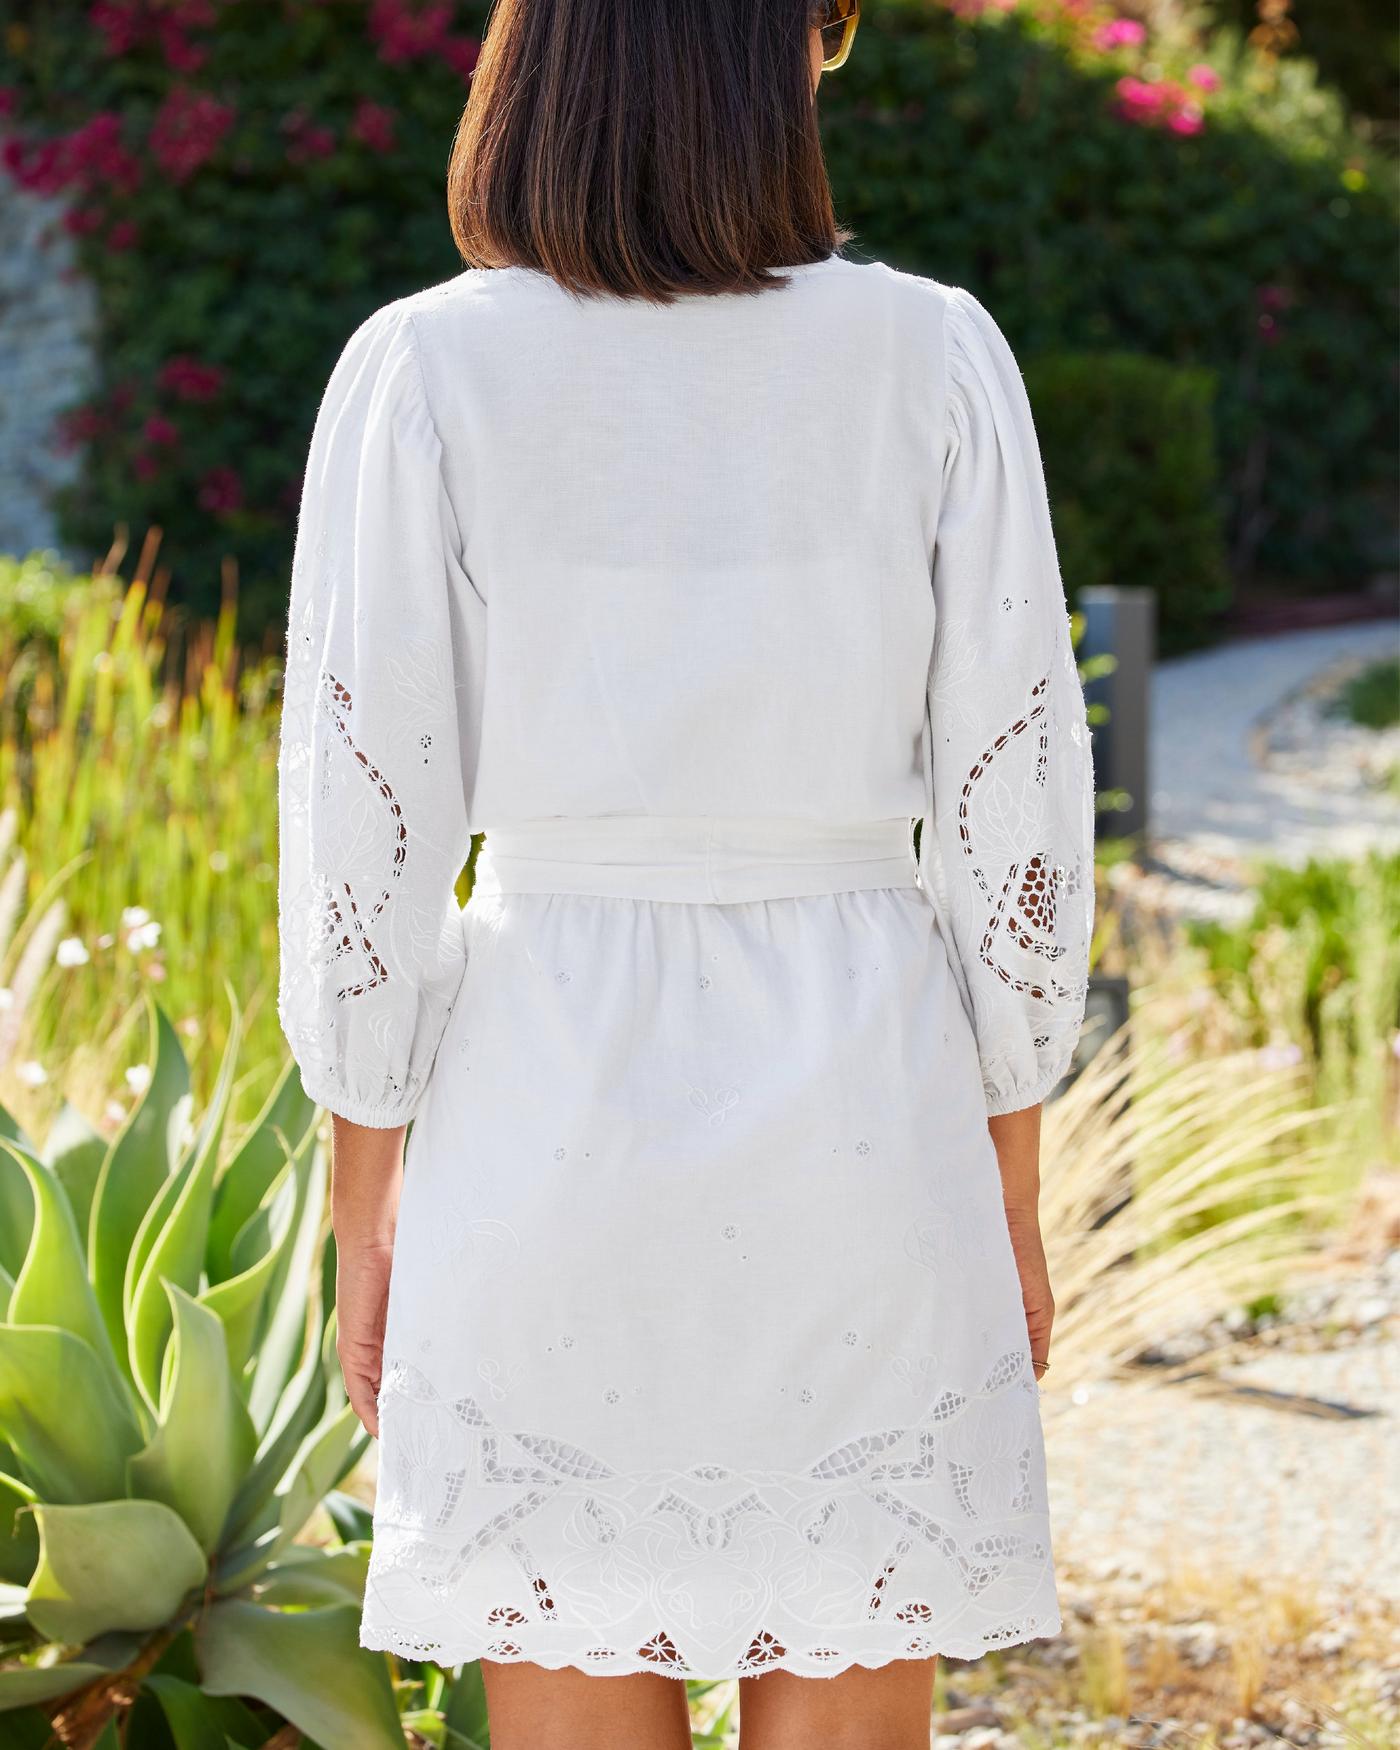 Off-white flex cotton dress with floral embroidery and crochet